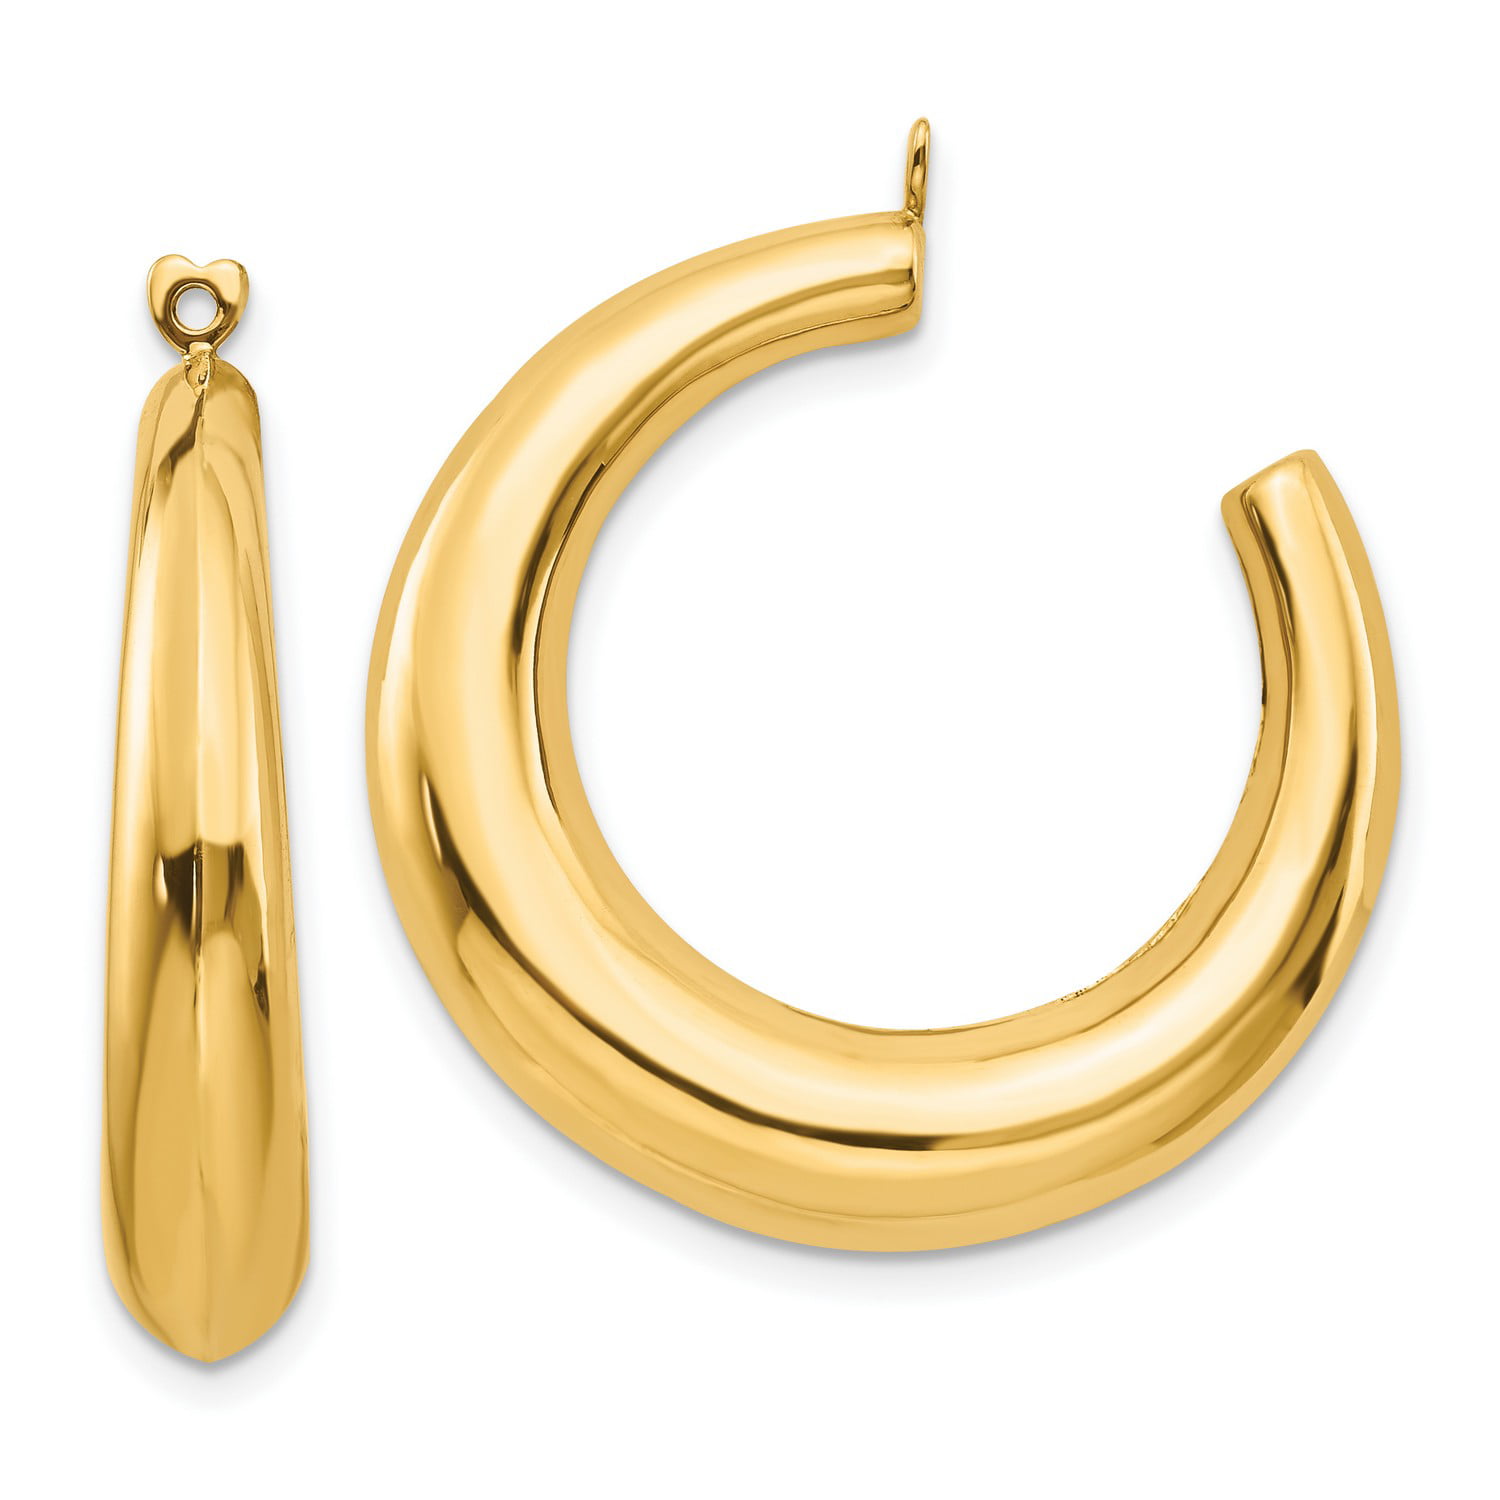 Best Quality Free Gift Box 14k Polished Hollow Hoop Earring Jackets